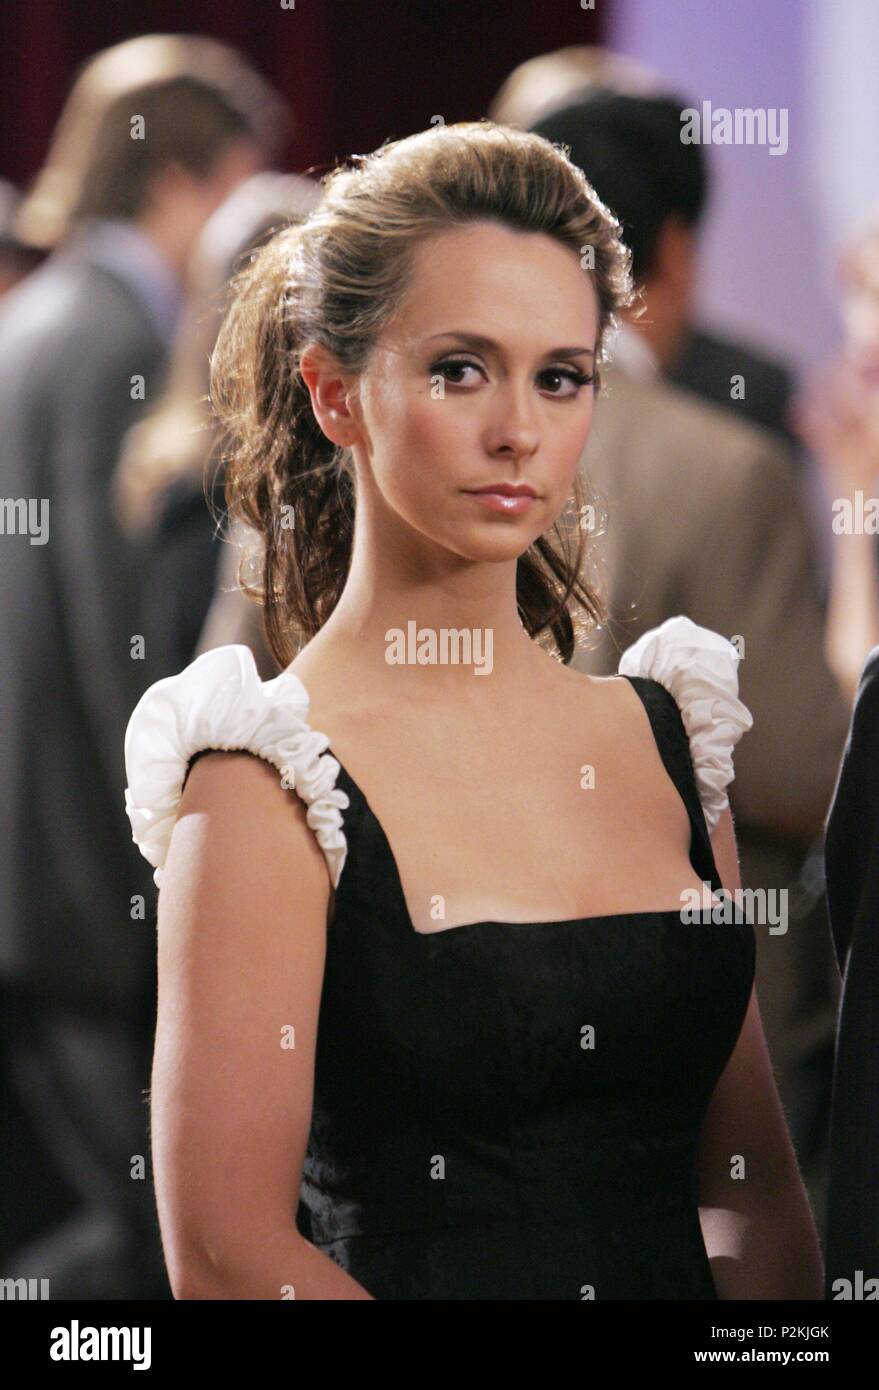 Original Film Title: GHOST WHISPERER-TV.  English Title: GHOST WHISPERER-TV.  Film Director: JOHN GRAY.  Year: 2005.  Stars: JENNIFER LOVE HEWITT. Credit: SONY PICTURES TELEVISION/CBS PARAMOUNT NETWORK TELEVISION/ / Album Stock Photo